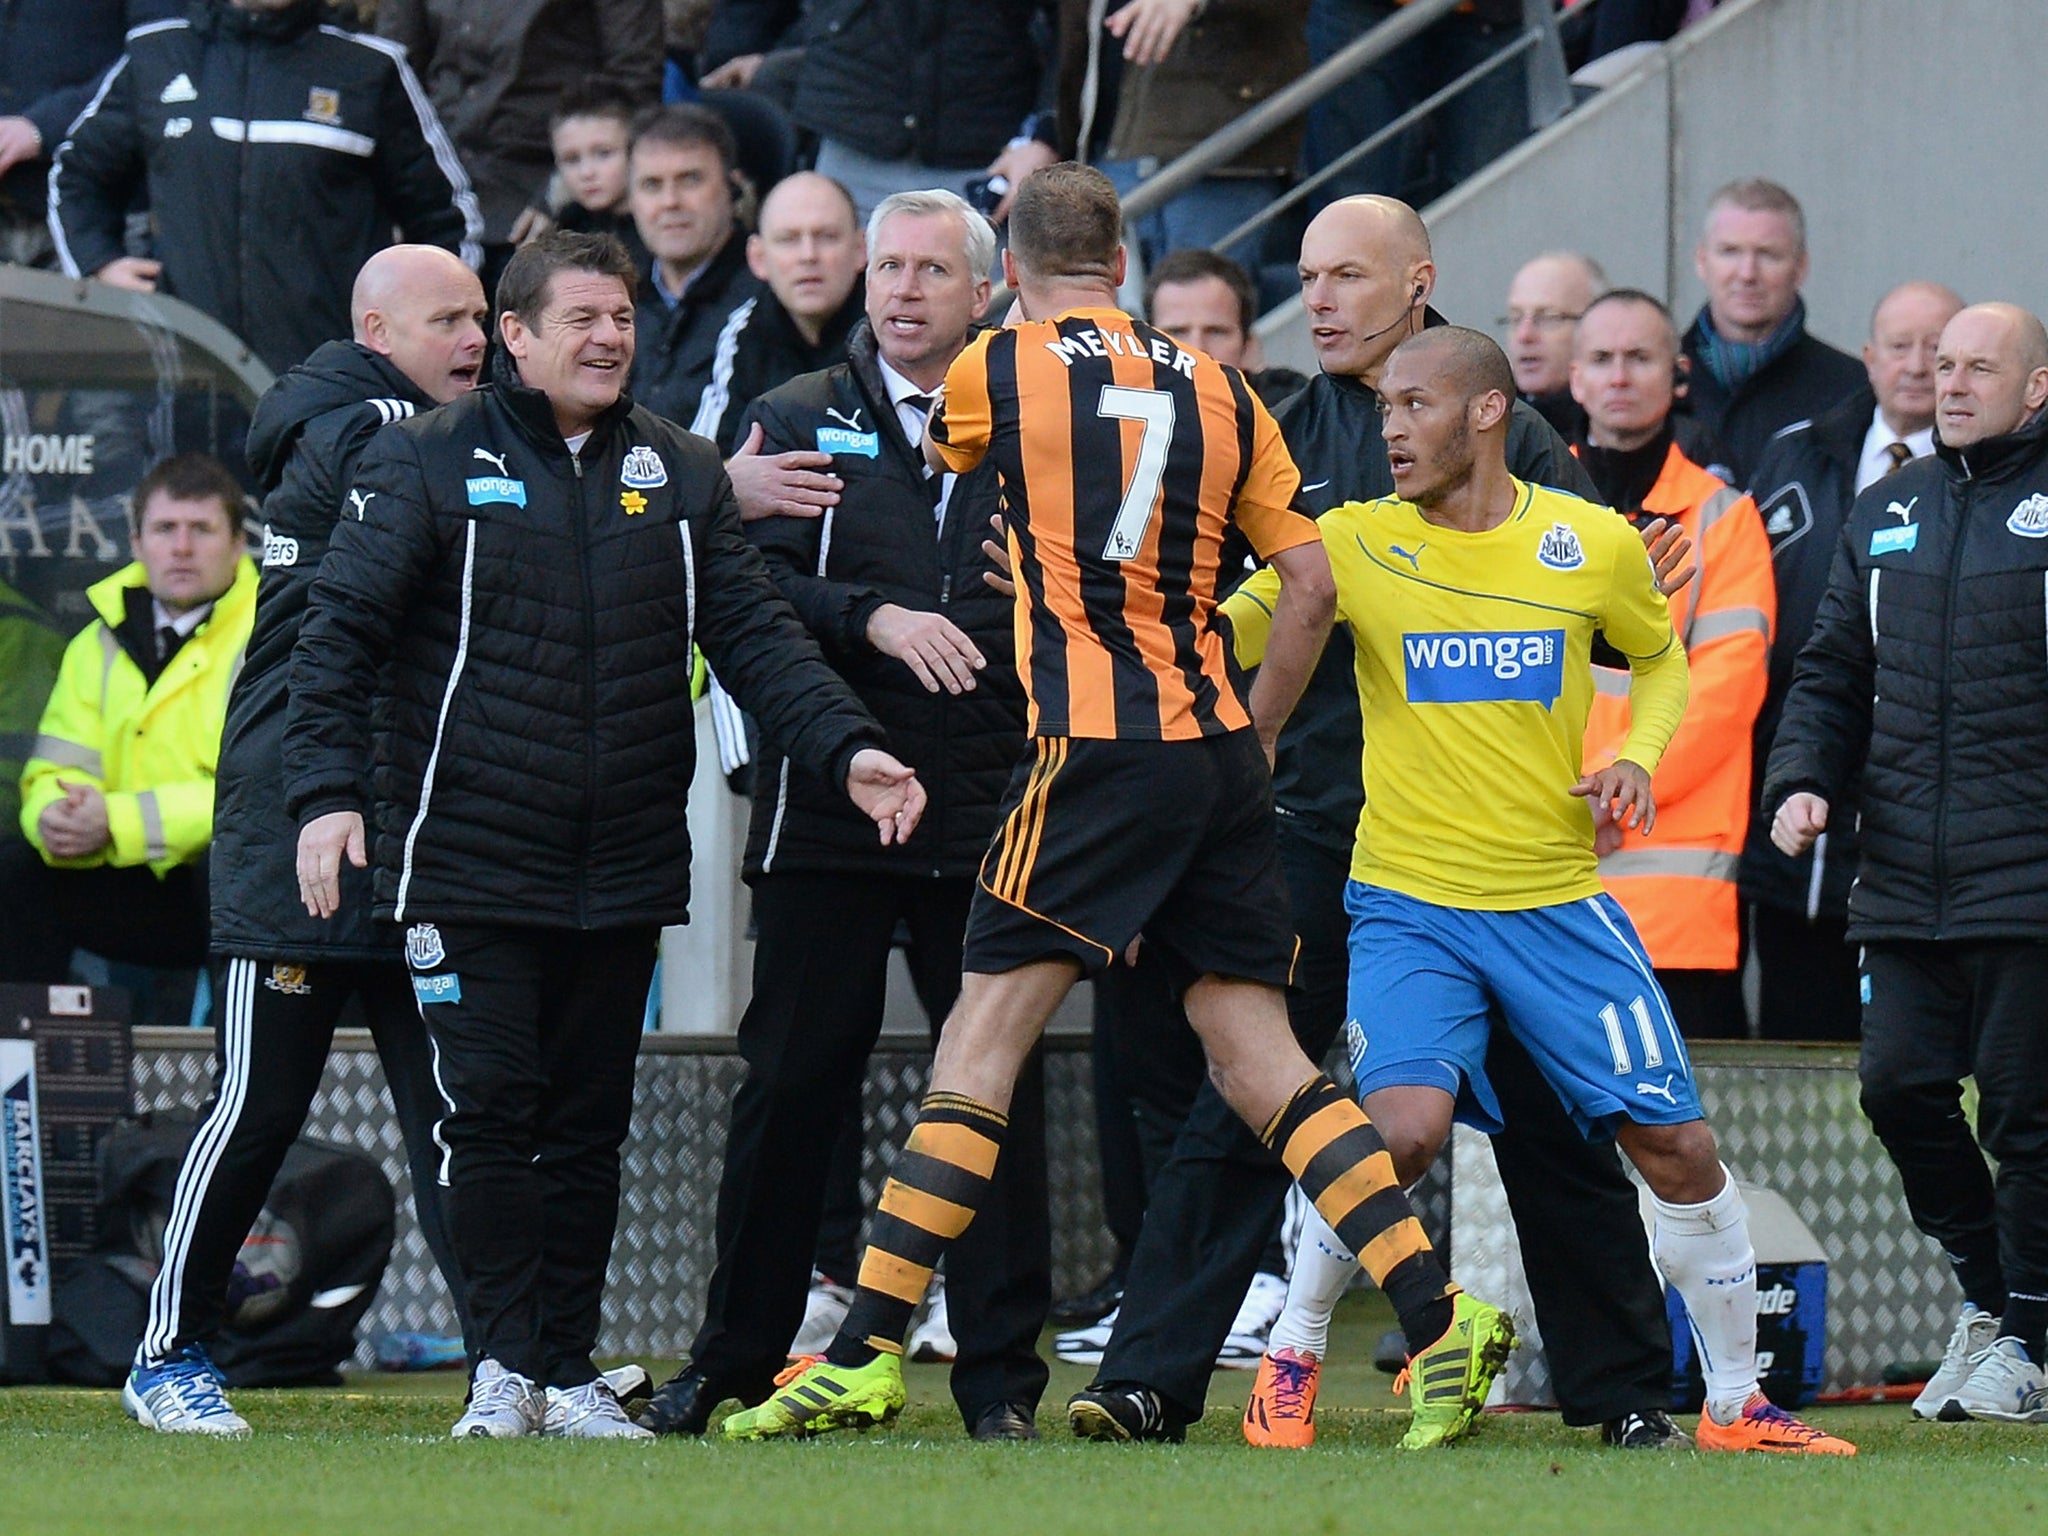 Newcastle manager Alan Pardew was sent to the stands for appearing to headbutt Hull midfielder David Meyler